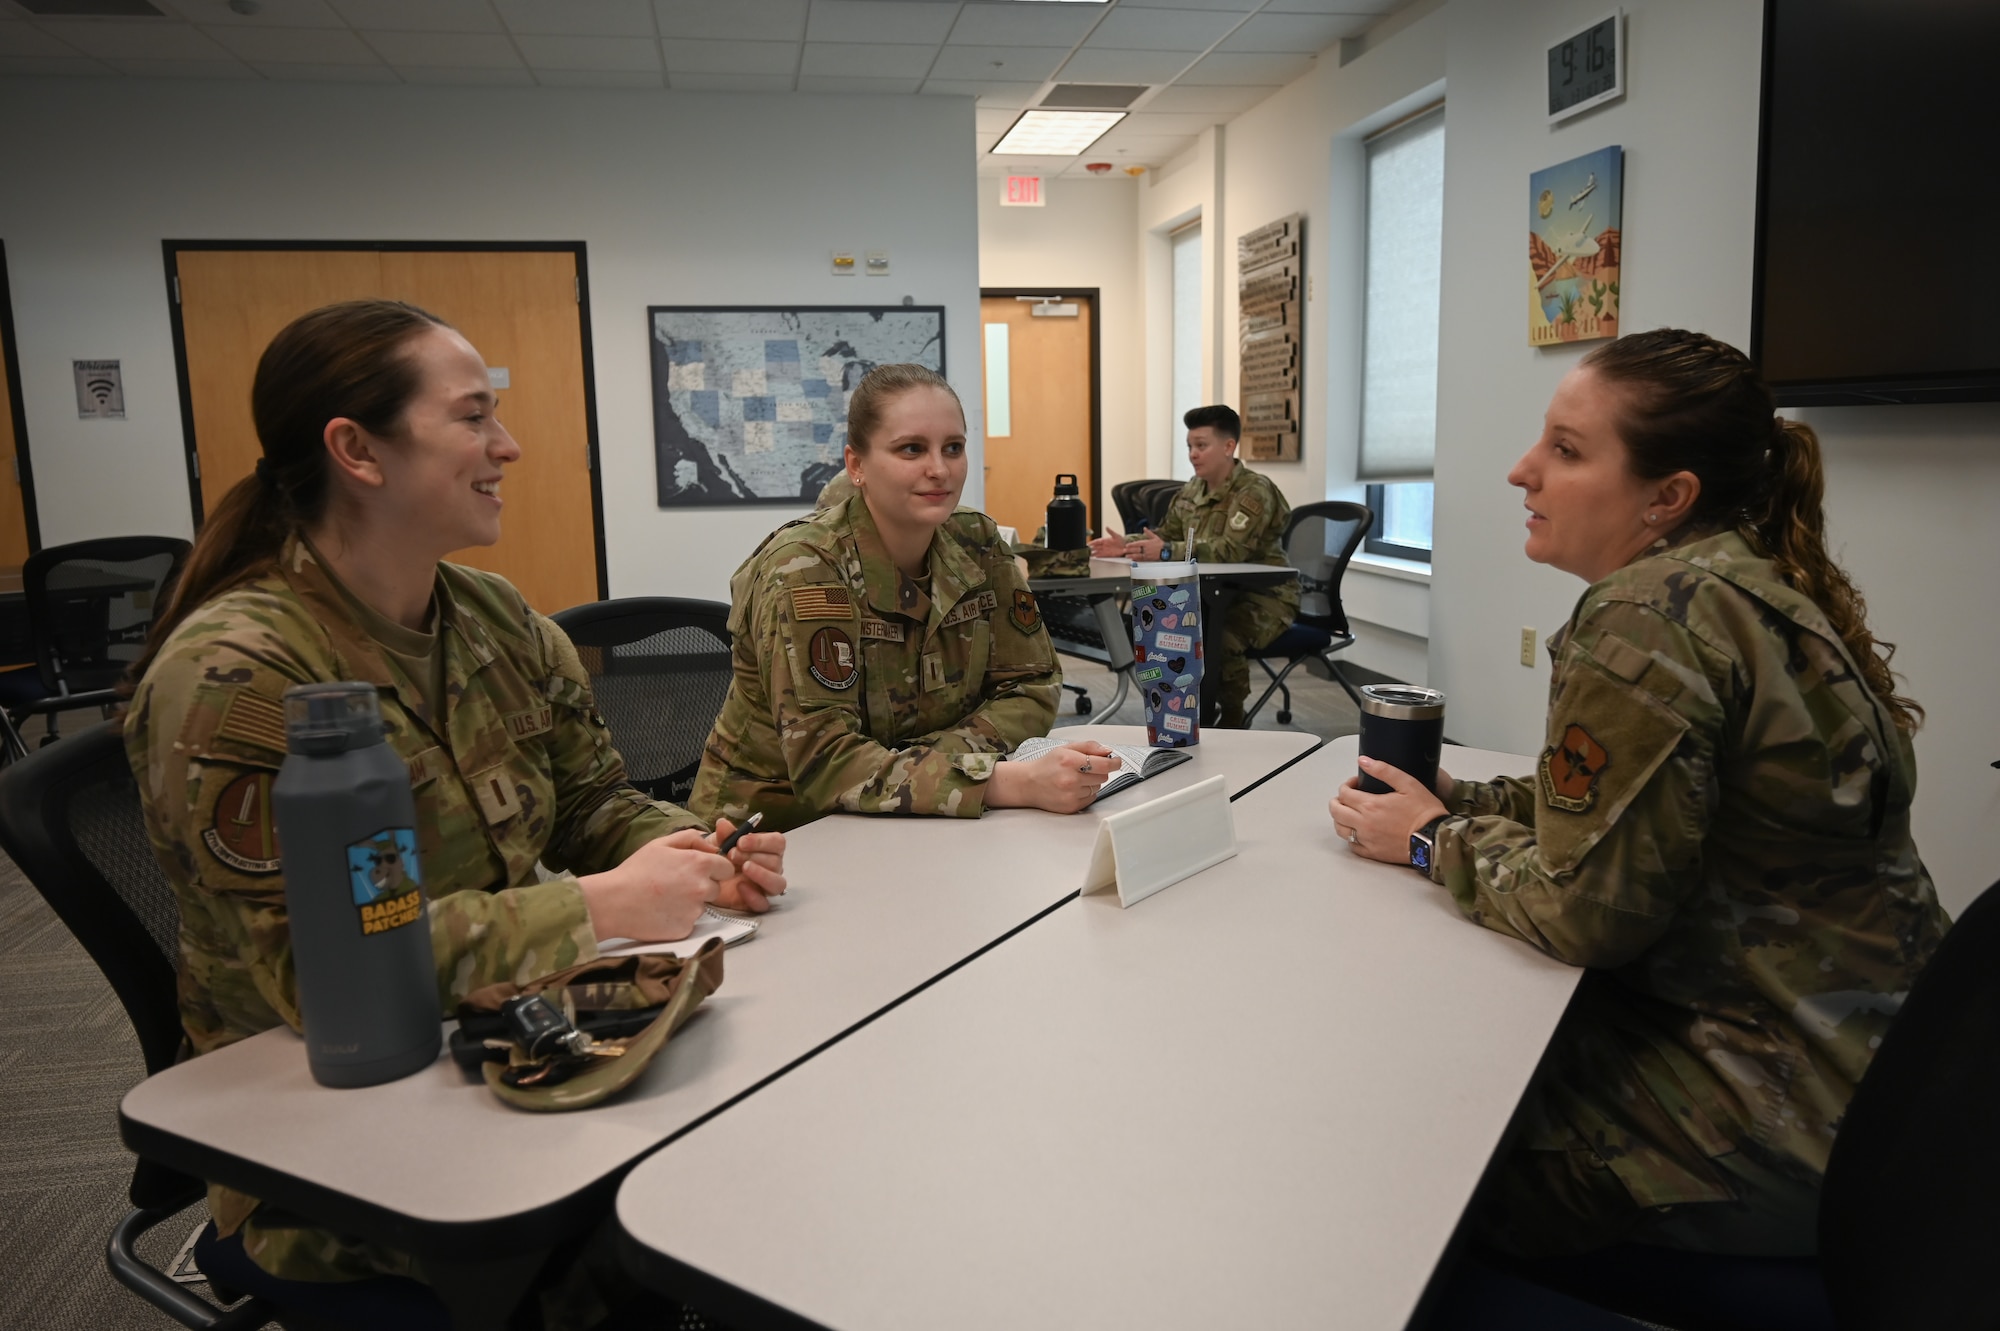 U.S. Air Force 2nd Lt. Jaine Abraham (left), 47th Contracting Squadron contracting specialist, 2nd Lt. Hayley Fenstermaker (middle), 47th CONS contracting specialist, speak with Maj. Kayleigh Stilwell (right), 47th Force Support Squadron commander, during a speed mentoring program at Laughlin Air Force Base, Texas, Jan. 31, 2023. During the mentoring event, Airmen were able to ask questions to representatives of various organizations on base in a 10 minute rotation, allowing for small groups to rotate between stations. (U.S. Air Force photo by Airman 1st Class Keira Rossman)